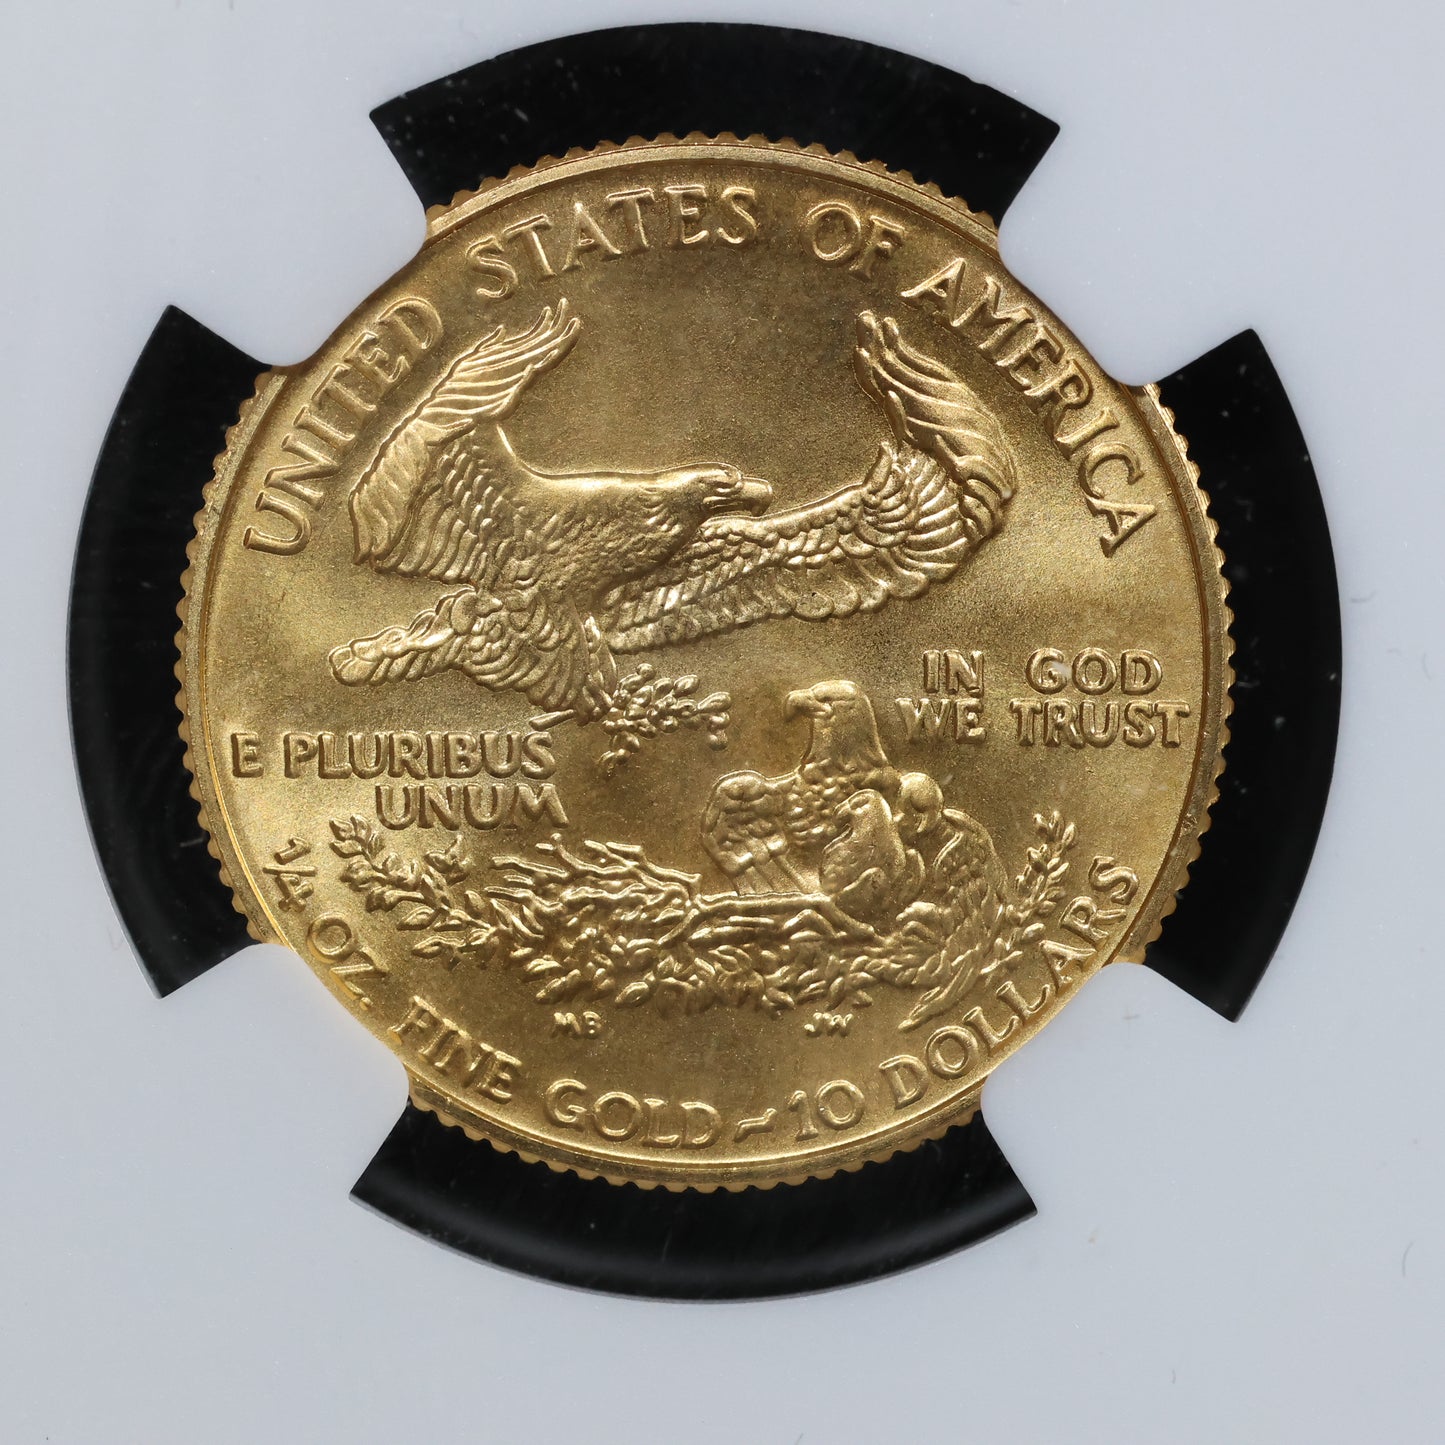 1990 1/4 oz Gold American Eagle 10$ Bullion Gold Coin - NGC MS 69